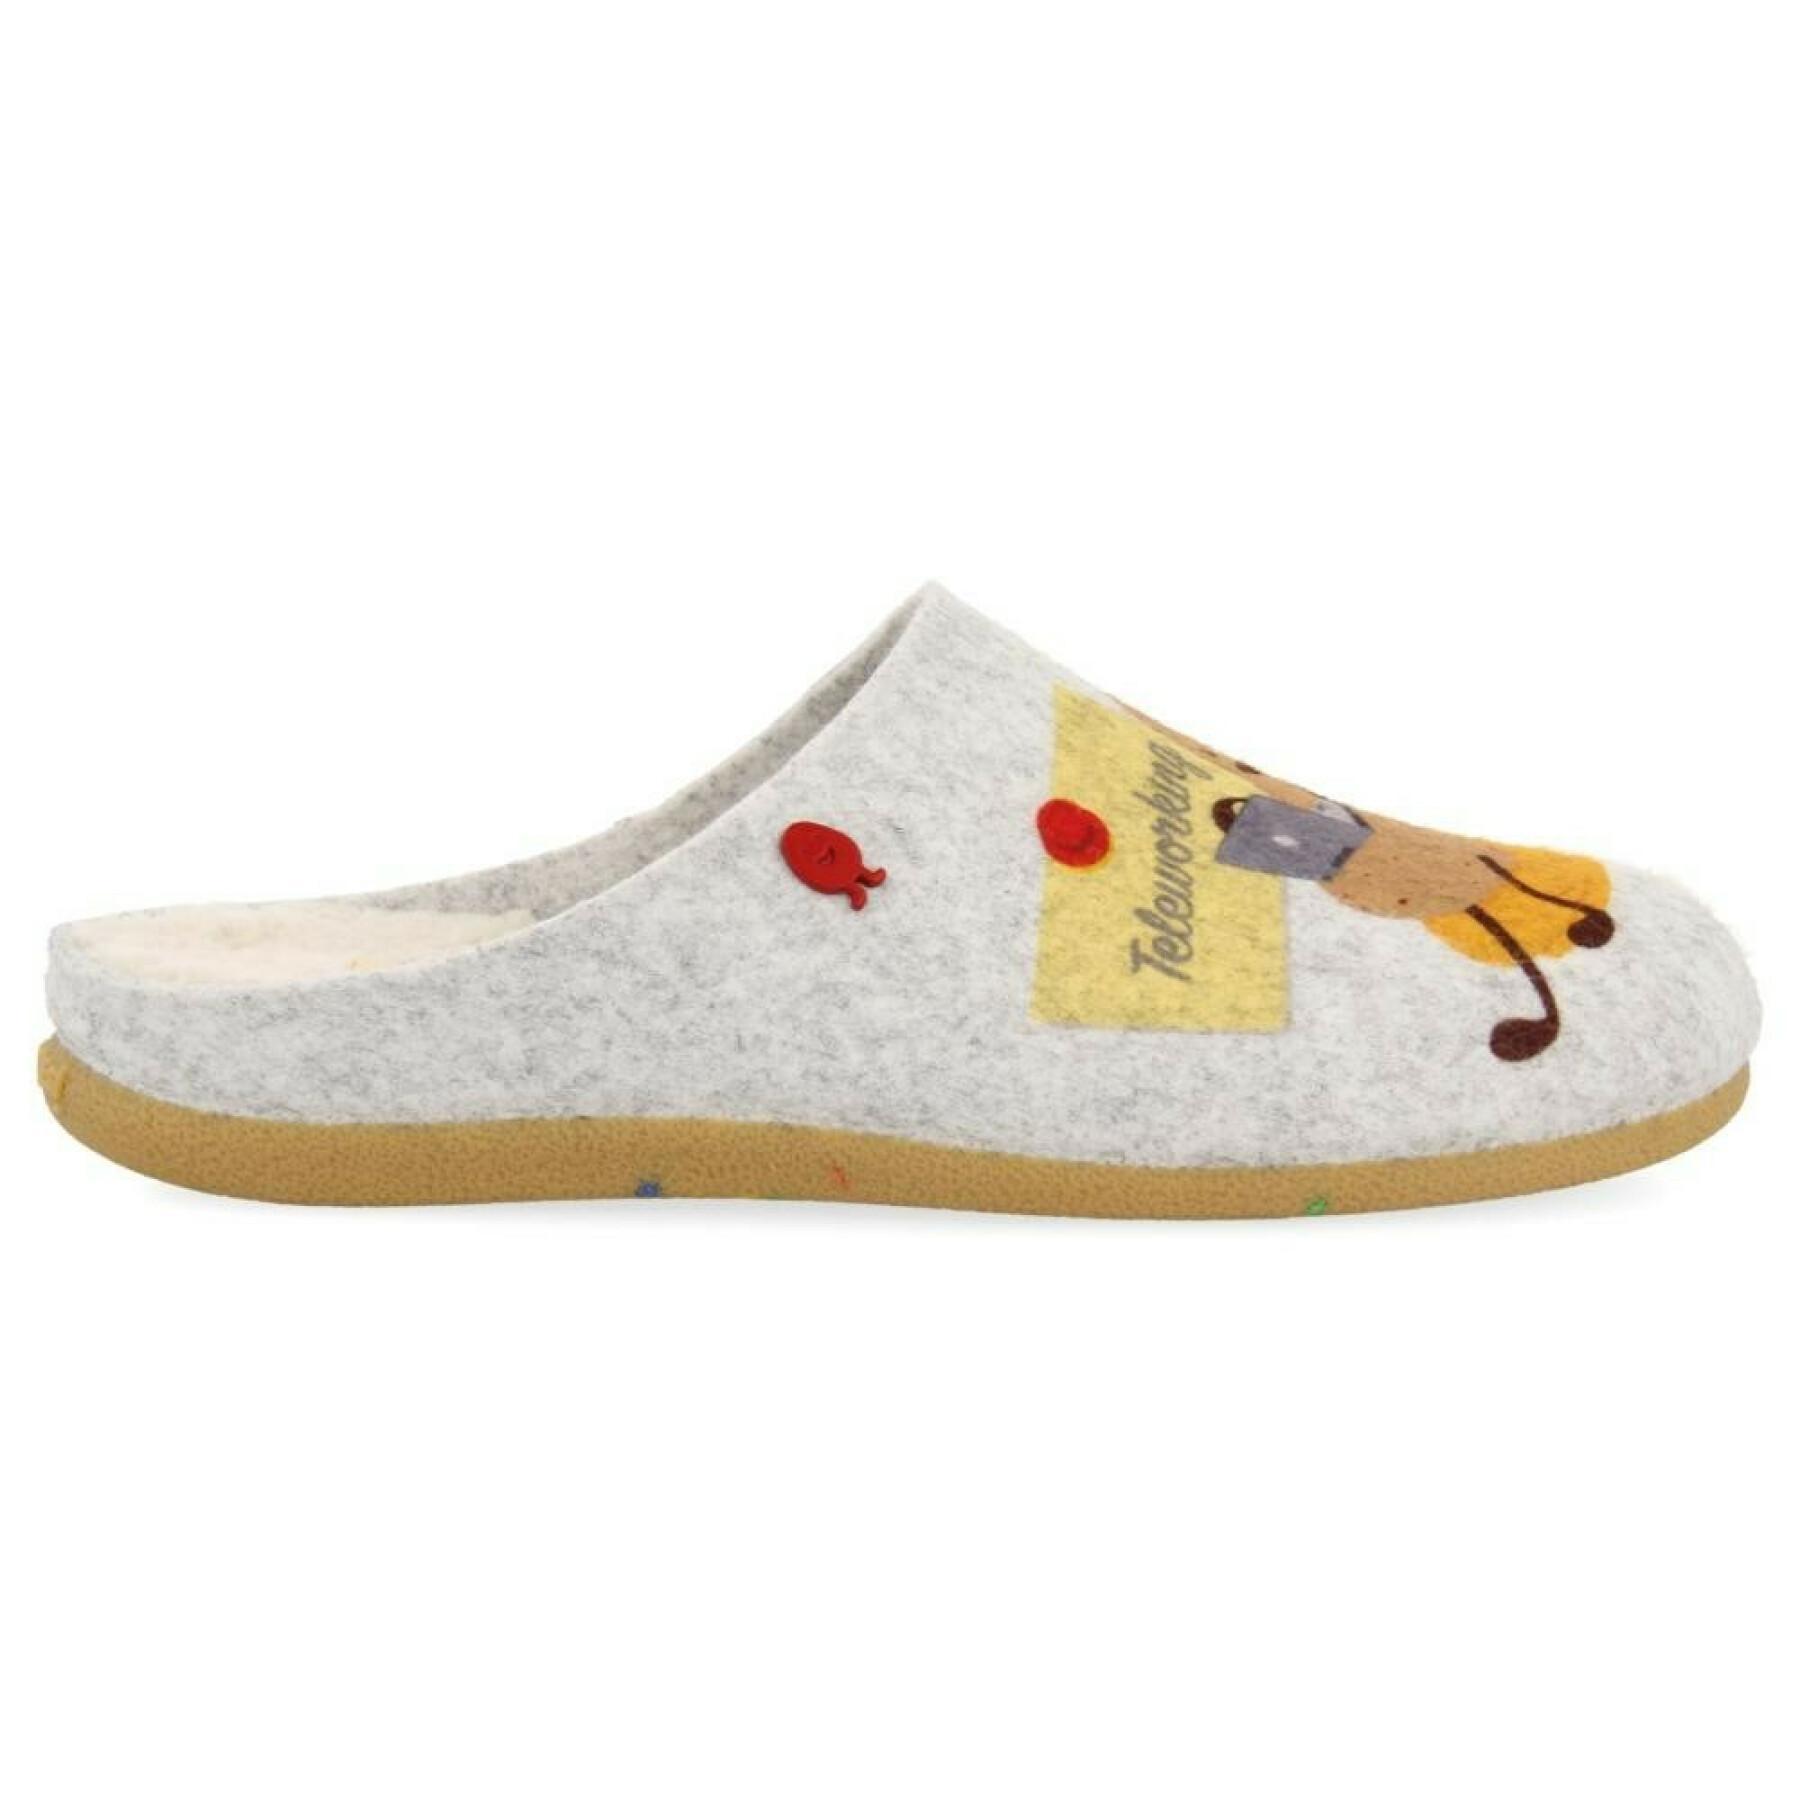 Slippers from the women's collection Hot Potatoes hatting